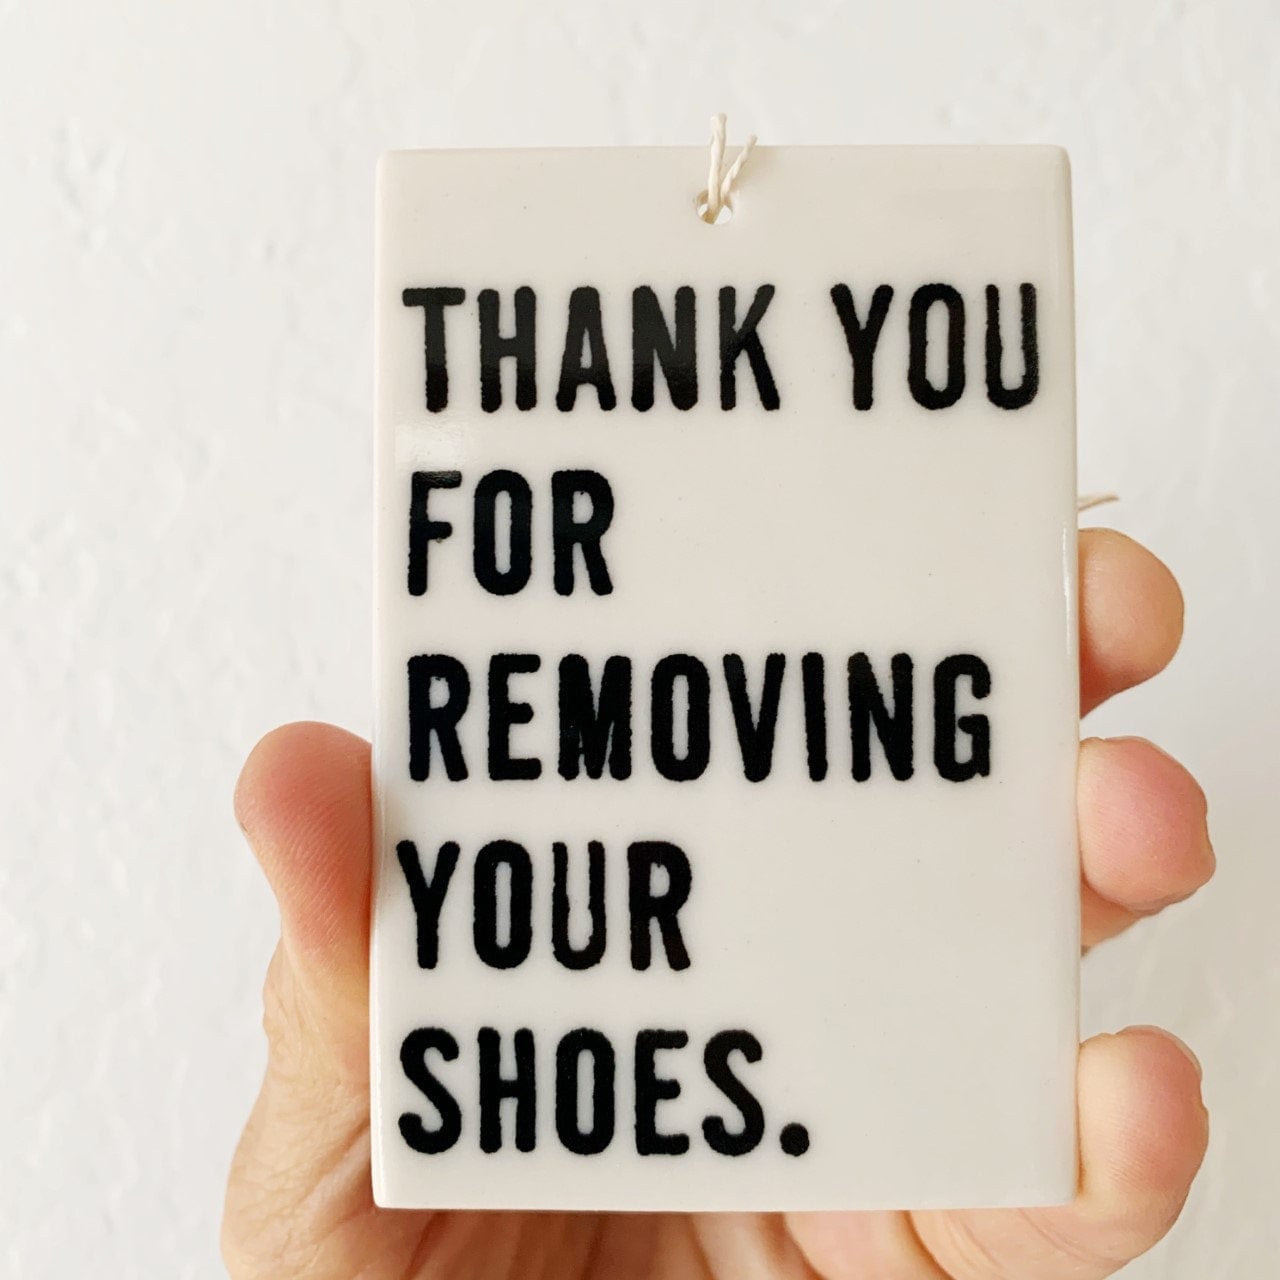 thank you for removing your shoes | shoe sign | shoes off sign | no shoes sign | minimalist | take off your shoes sign | screenprinted